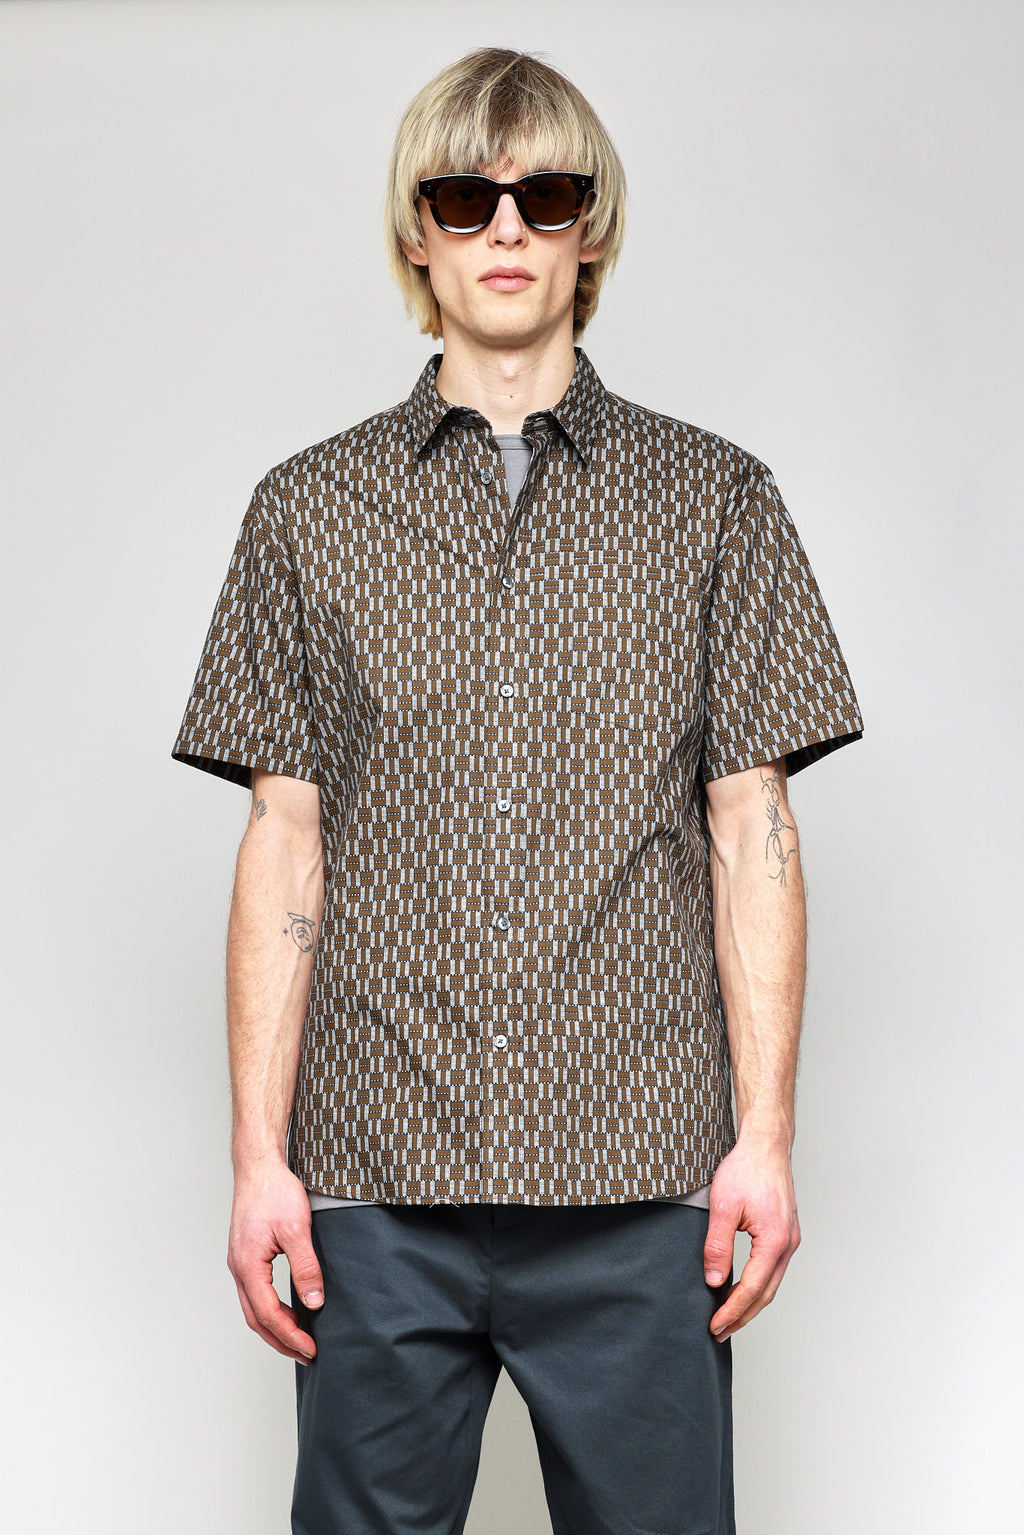 Japanese Graphic Grid Print in Khaki and Blue 02